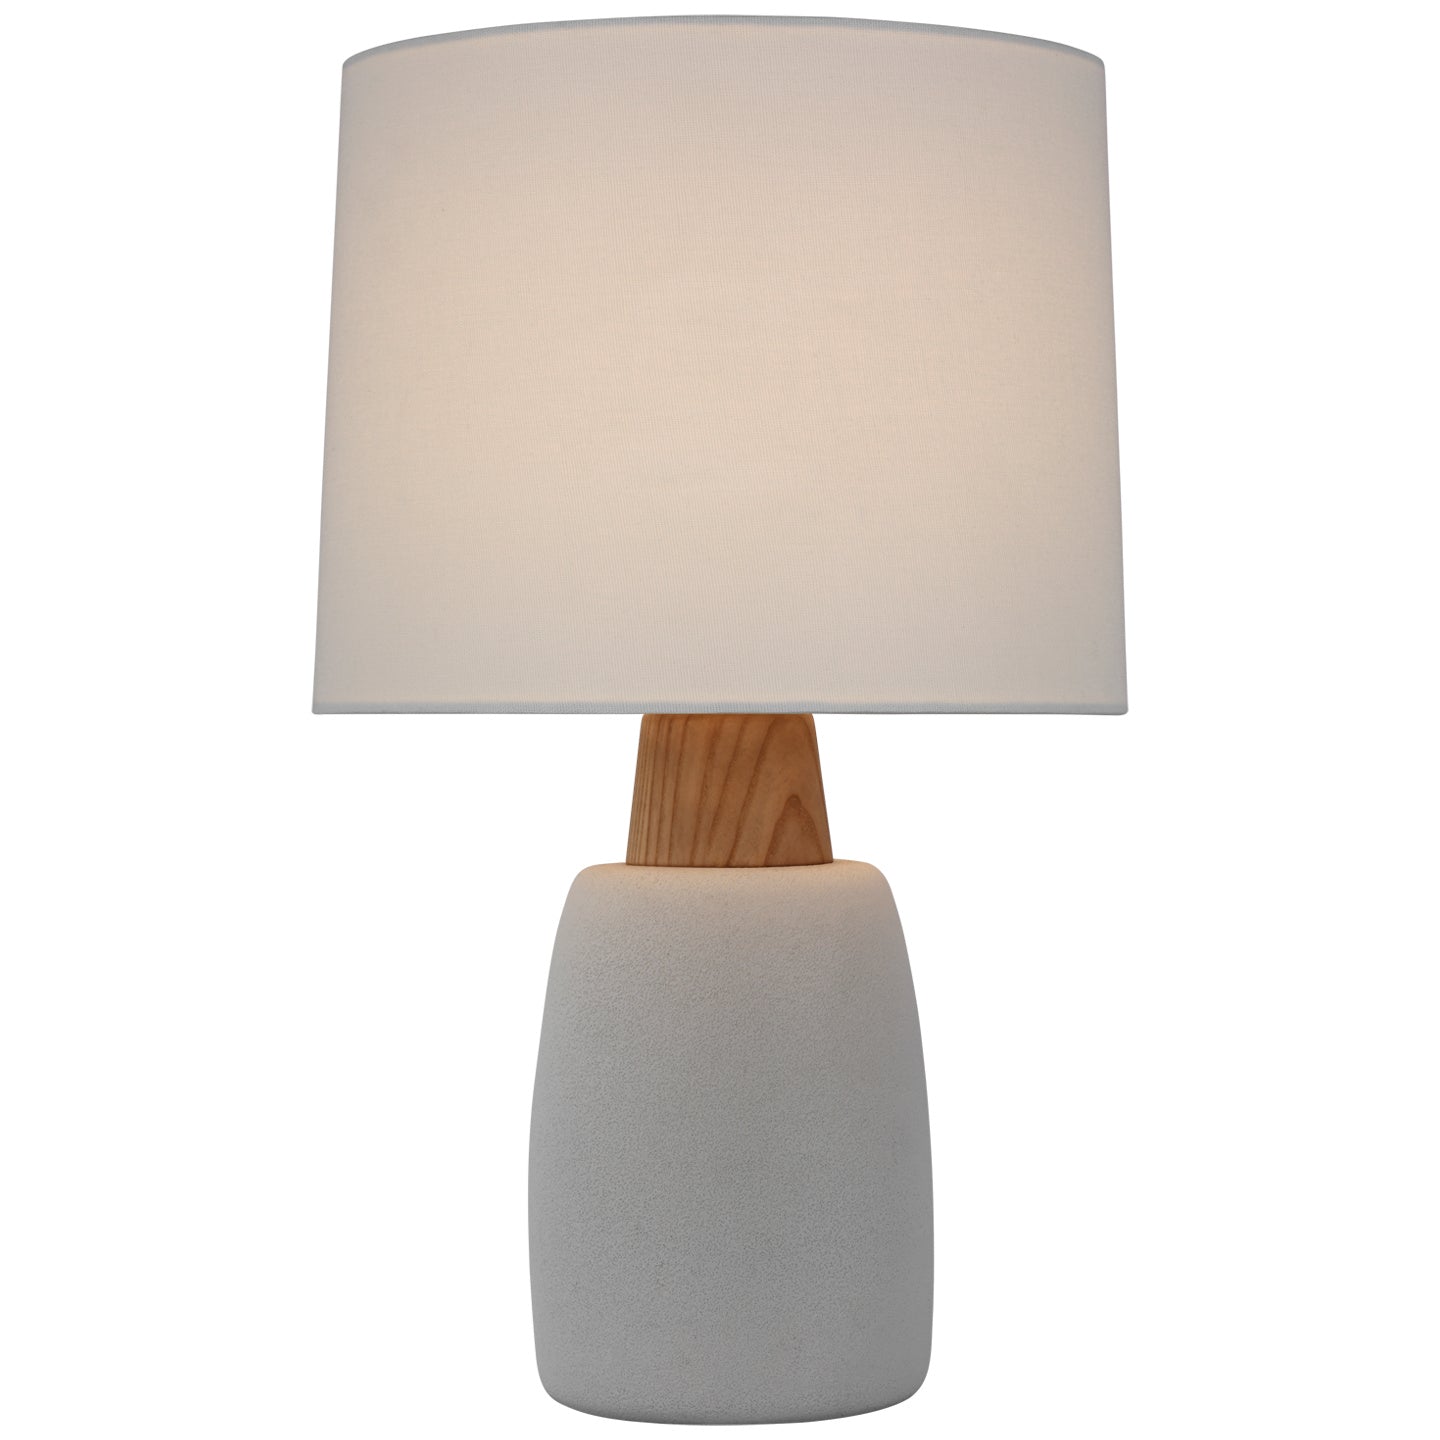 Load image into Gallery viewer, Visual Comfort Signature - BBL 3611PRW-L - LED Table Lamp - Aida - Porous White and Natural Oak
